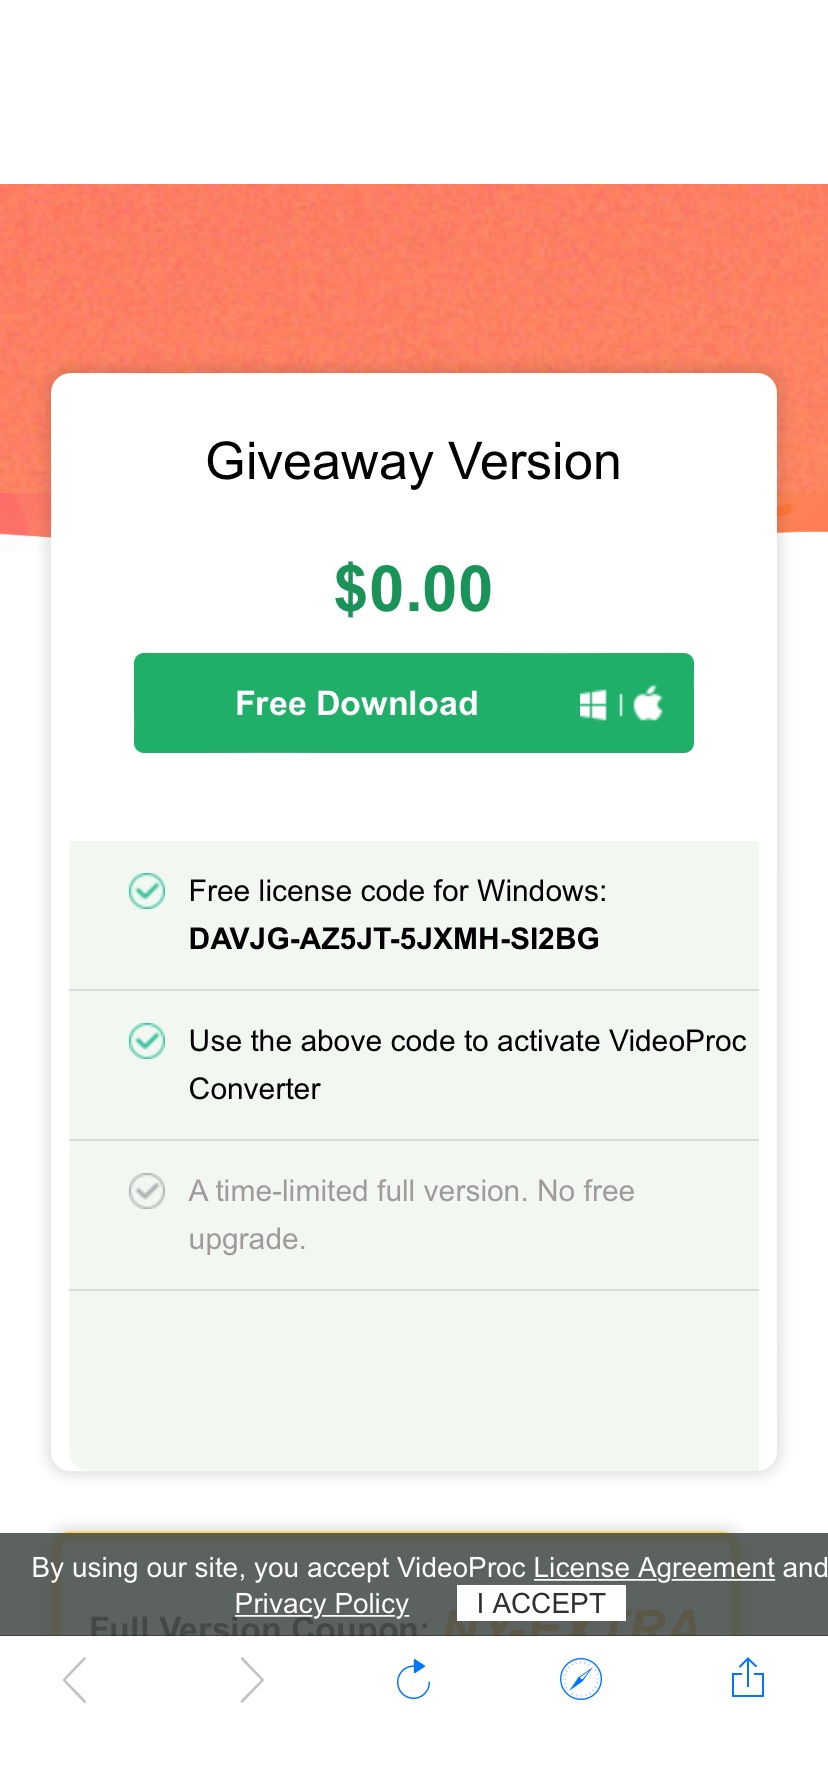 VideoProc Converter 影片工具箱软件
[Official] VideoProc Converter Full License Key Giveaway, Coupon Code Time-limited Offer